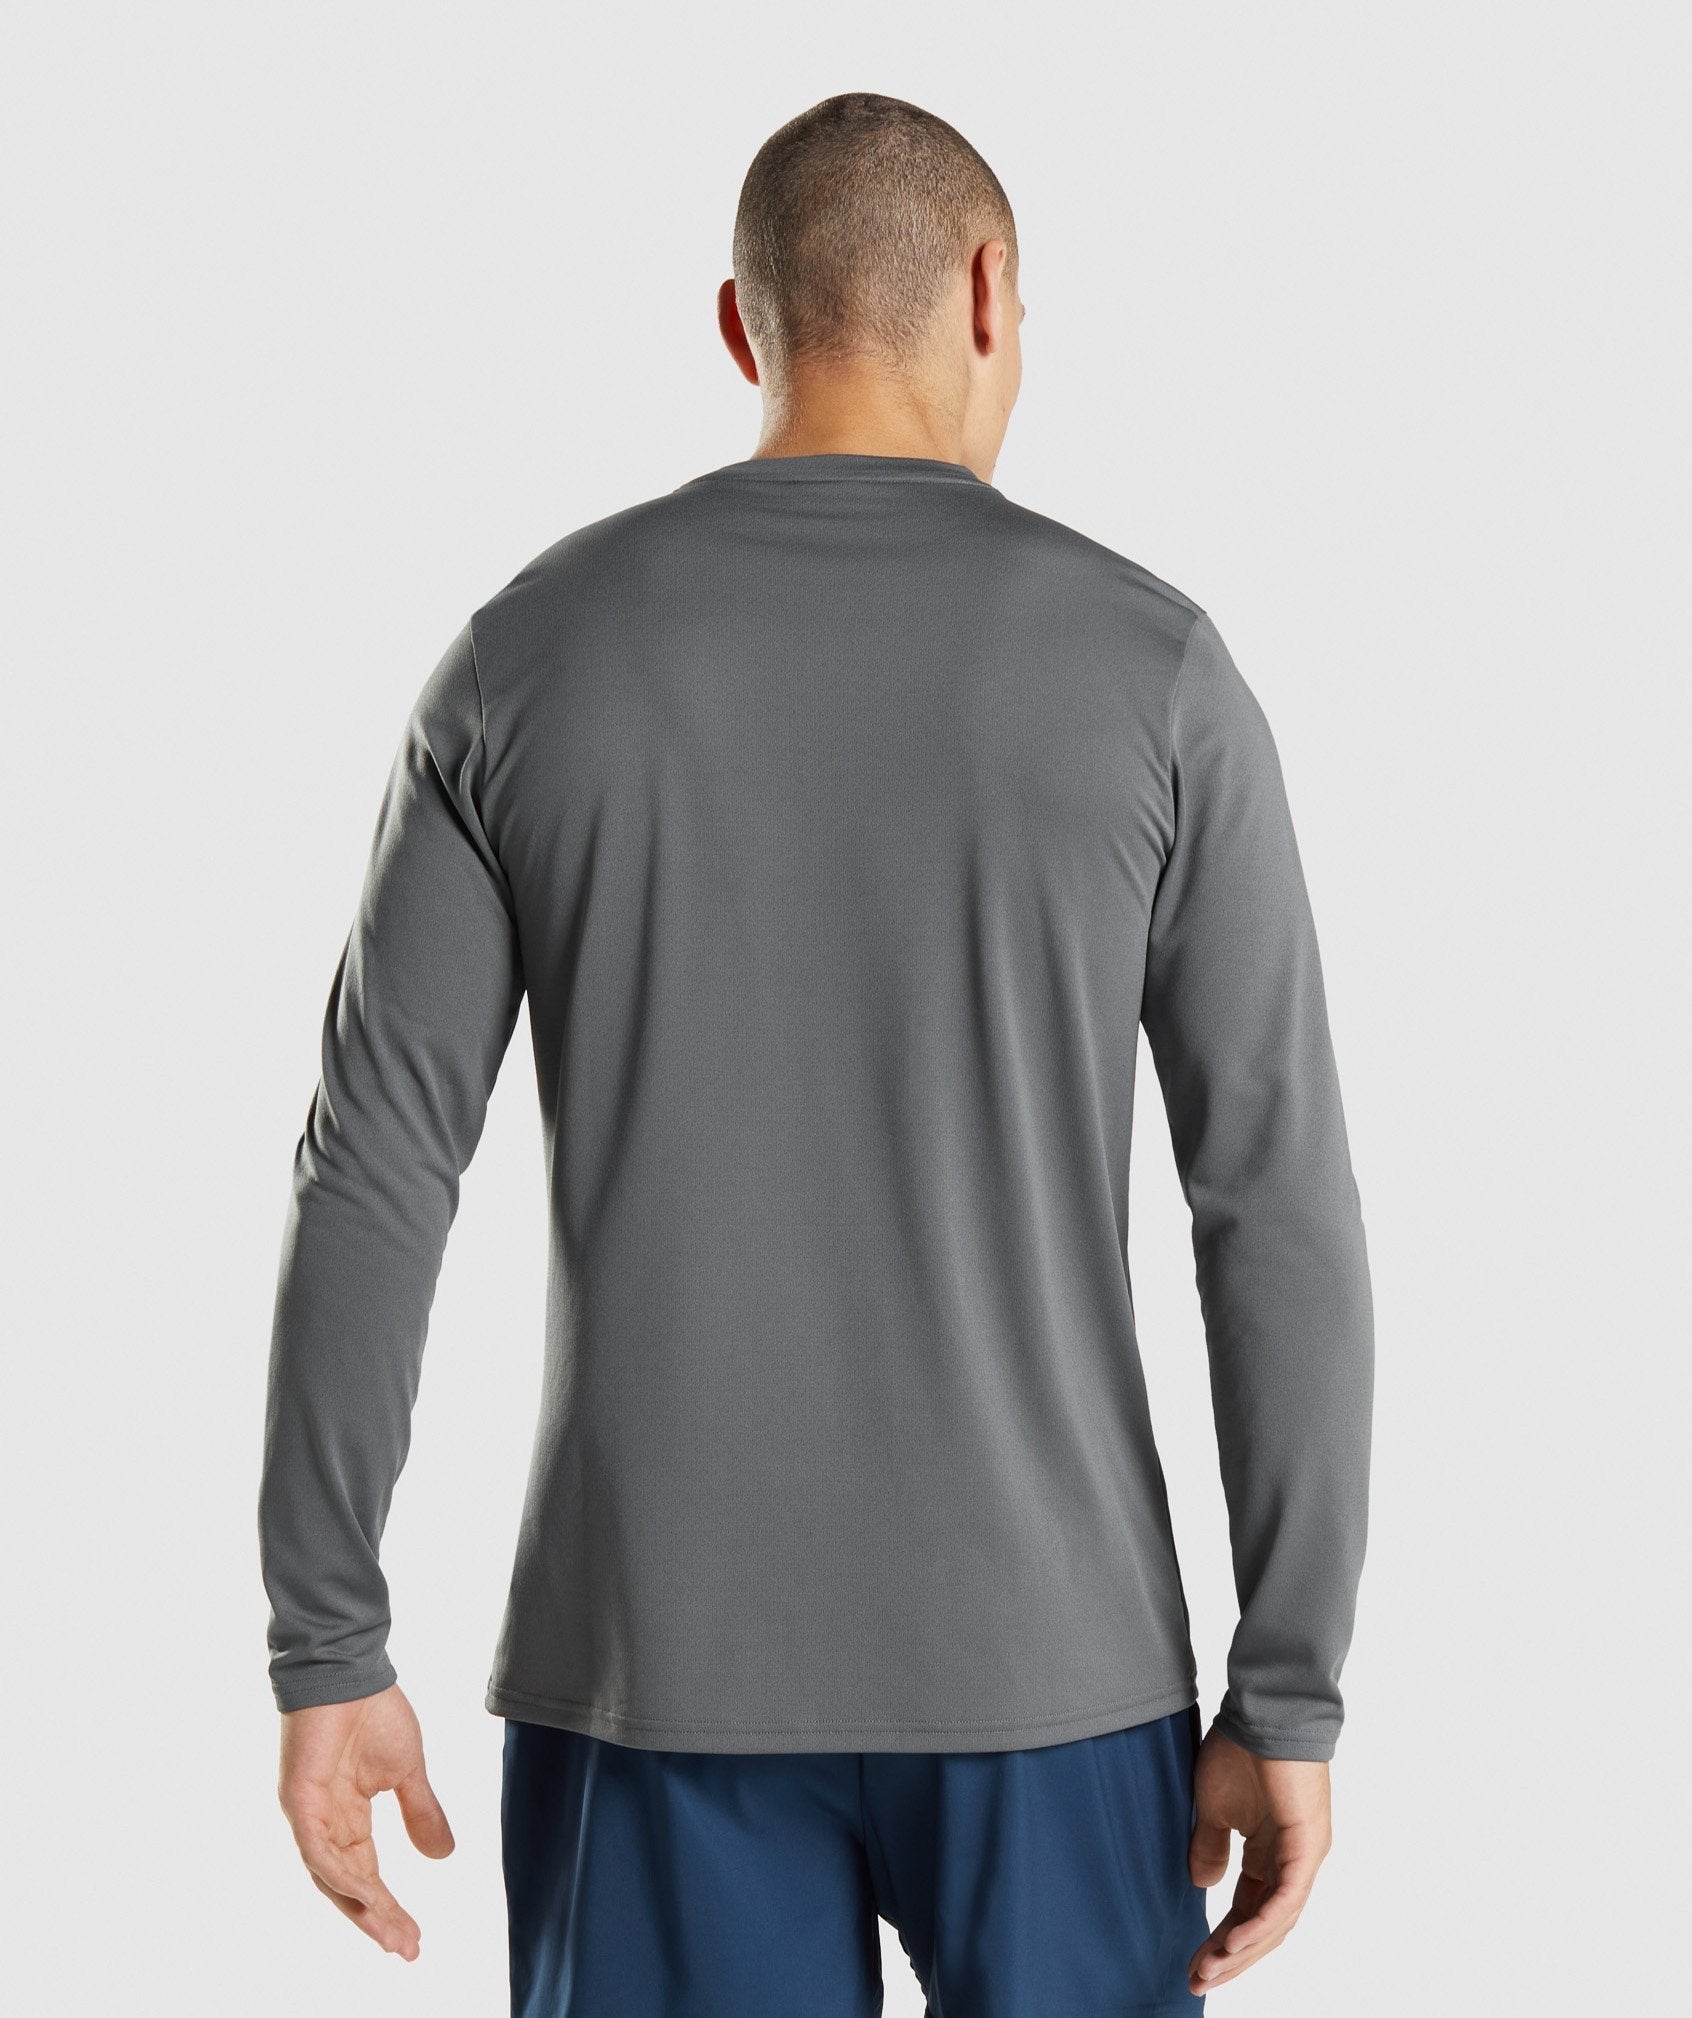 Arrival Long Sleeve T-Shirt in Charcoal - view 2